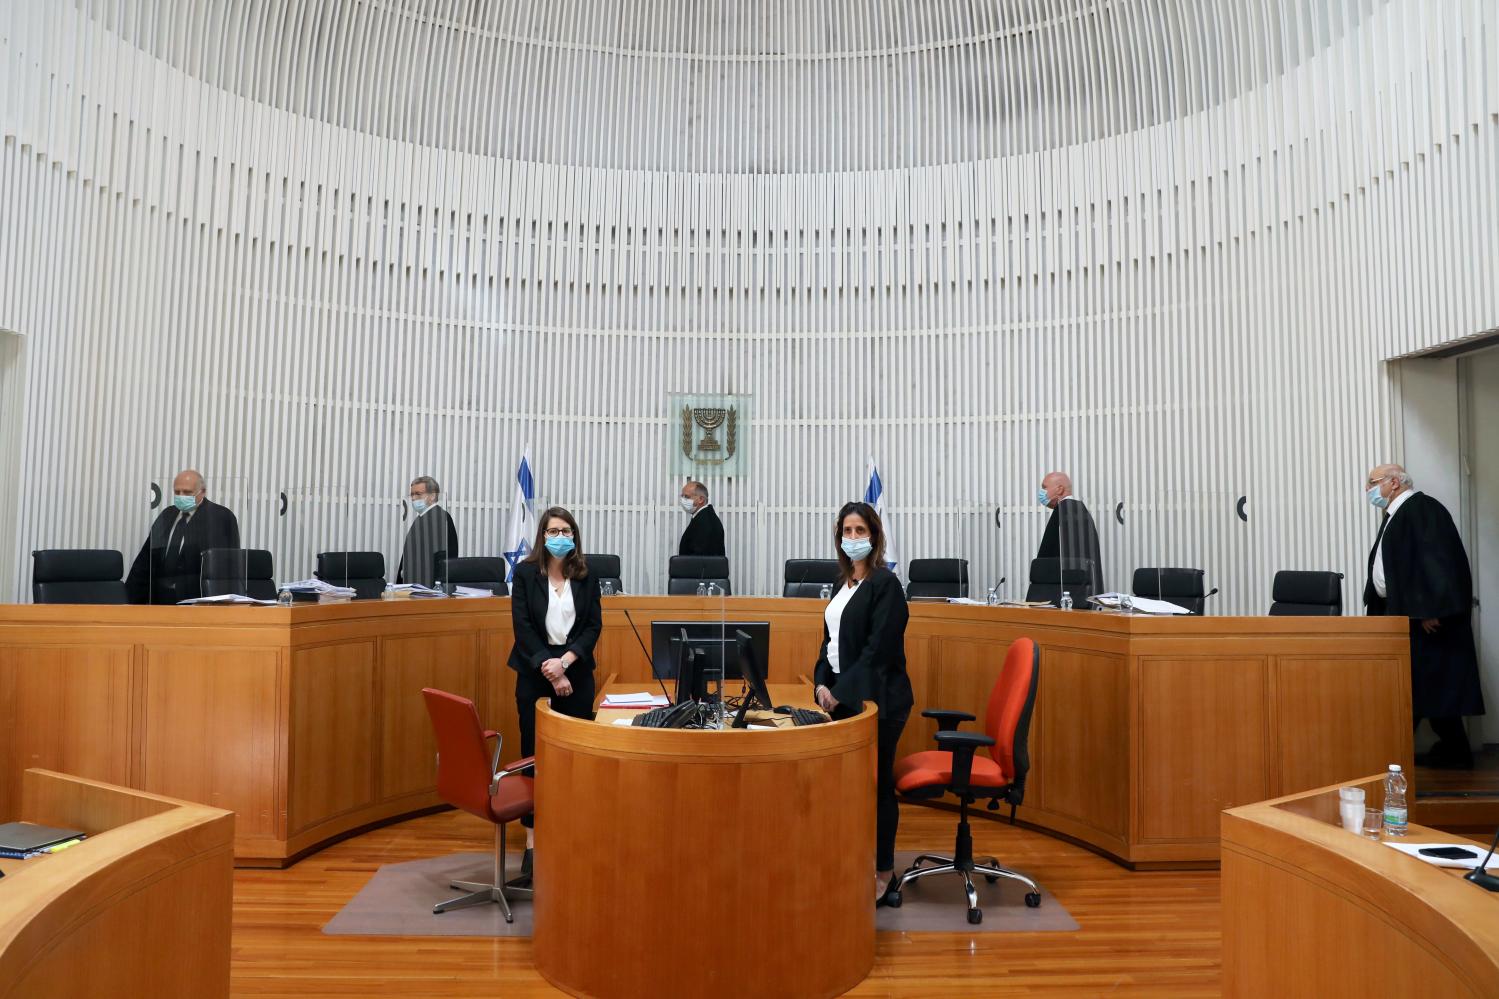 A panel of judges of the Israeli Supreme Court wear face masks as they address a discussion on a petition asking whether Israeli Prime Minister Benjamin Netanyahu can form a government legally and publicly when indictments are filed against him on a charges of fraud, bribery, and breach of trust, at the Israeli Supreme Court in Jerusalem May 4, 2020. Abir Sultan/Pool via REUTERS